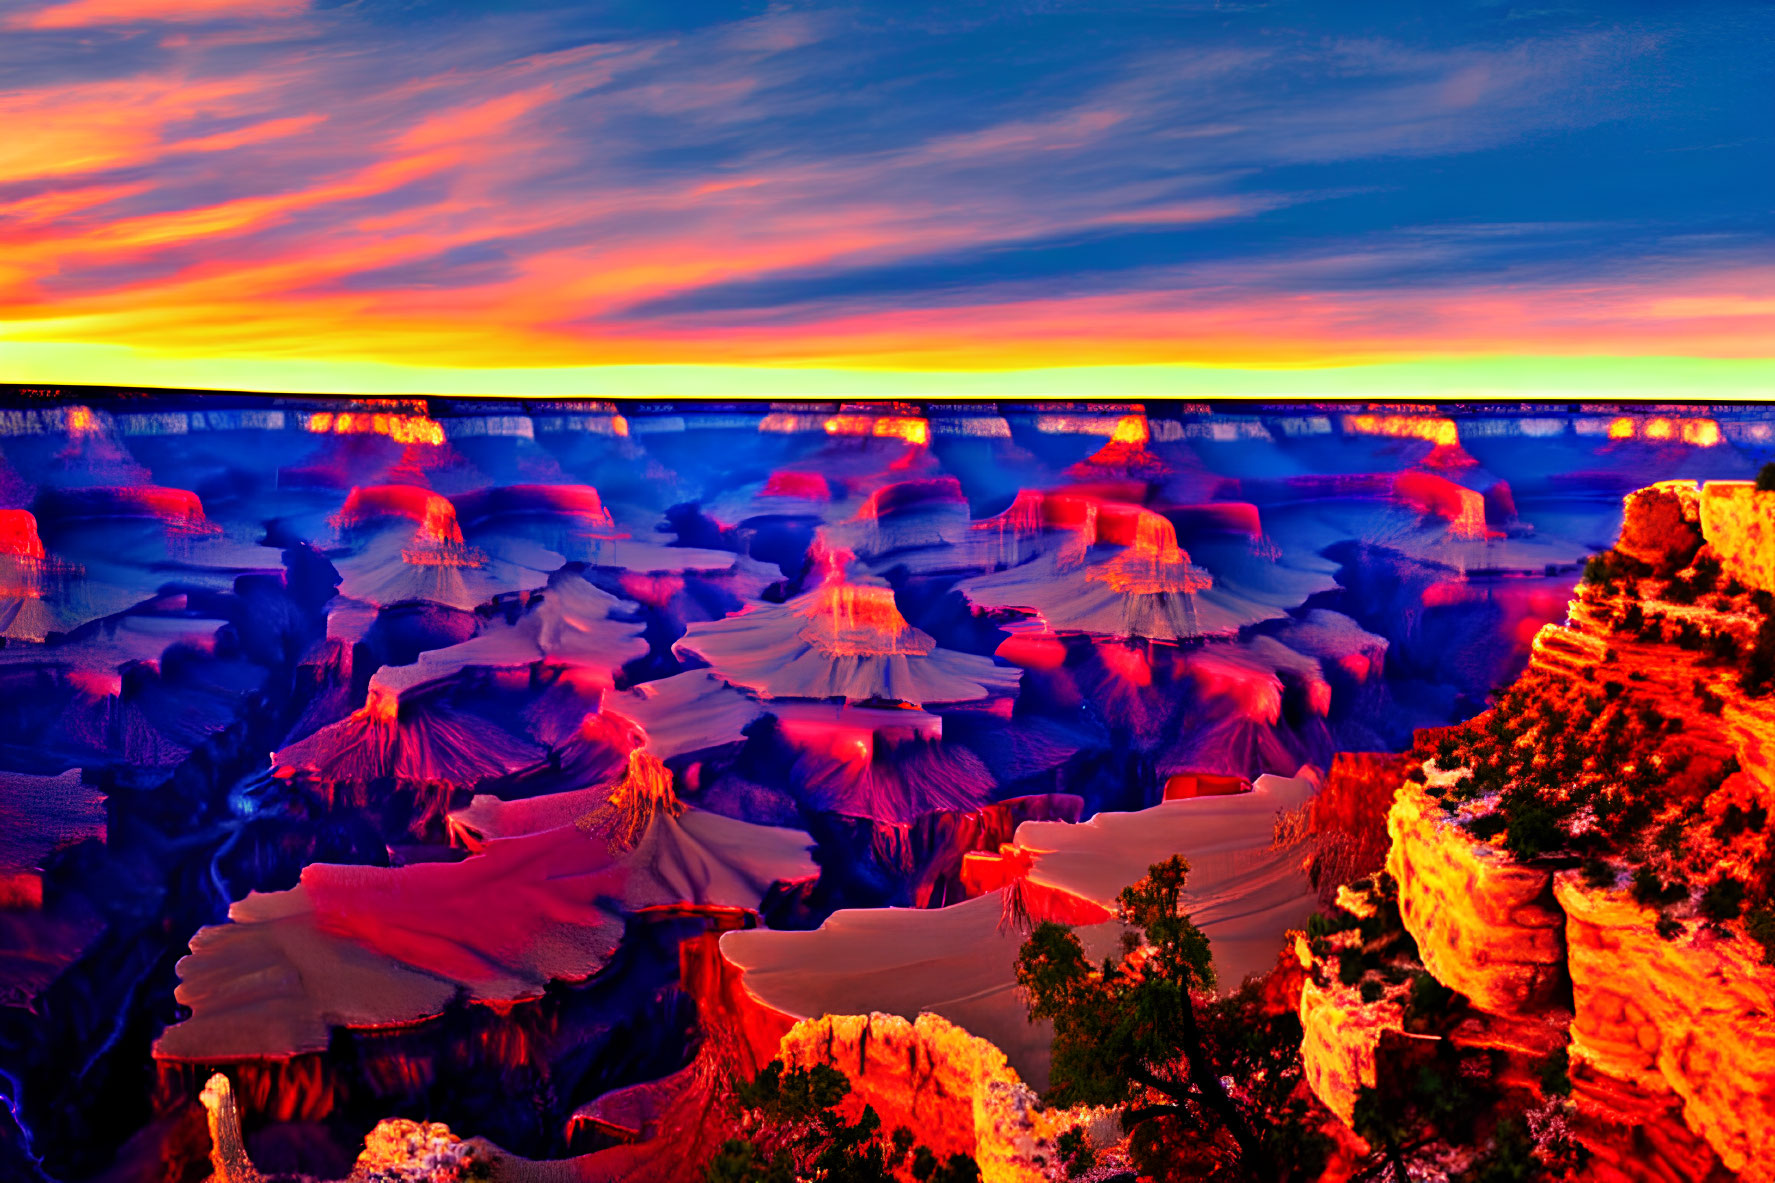 Stunning Orange and Blue Sunset Over Grand Canyon Rock Formations